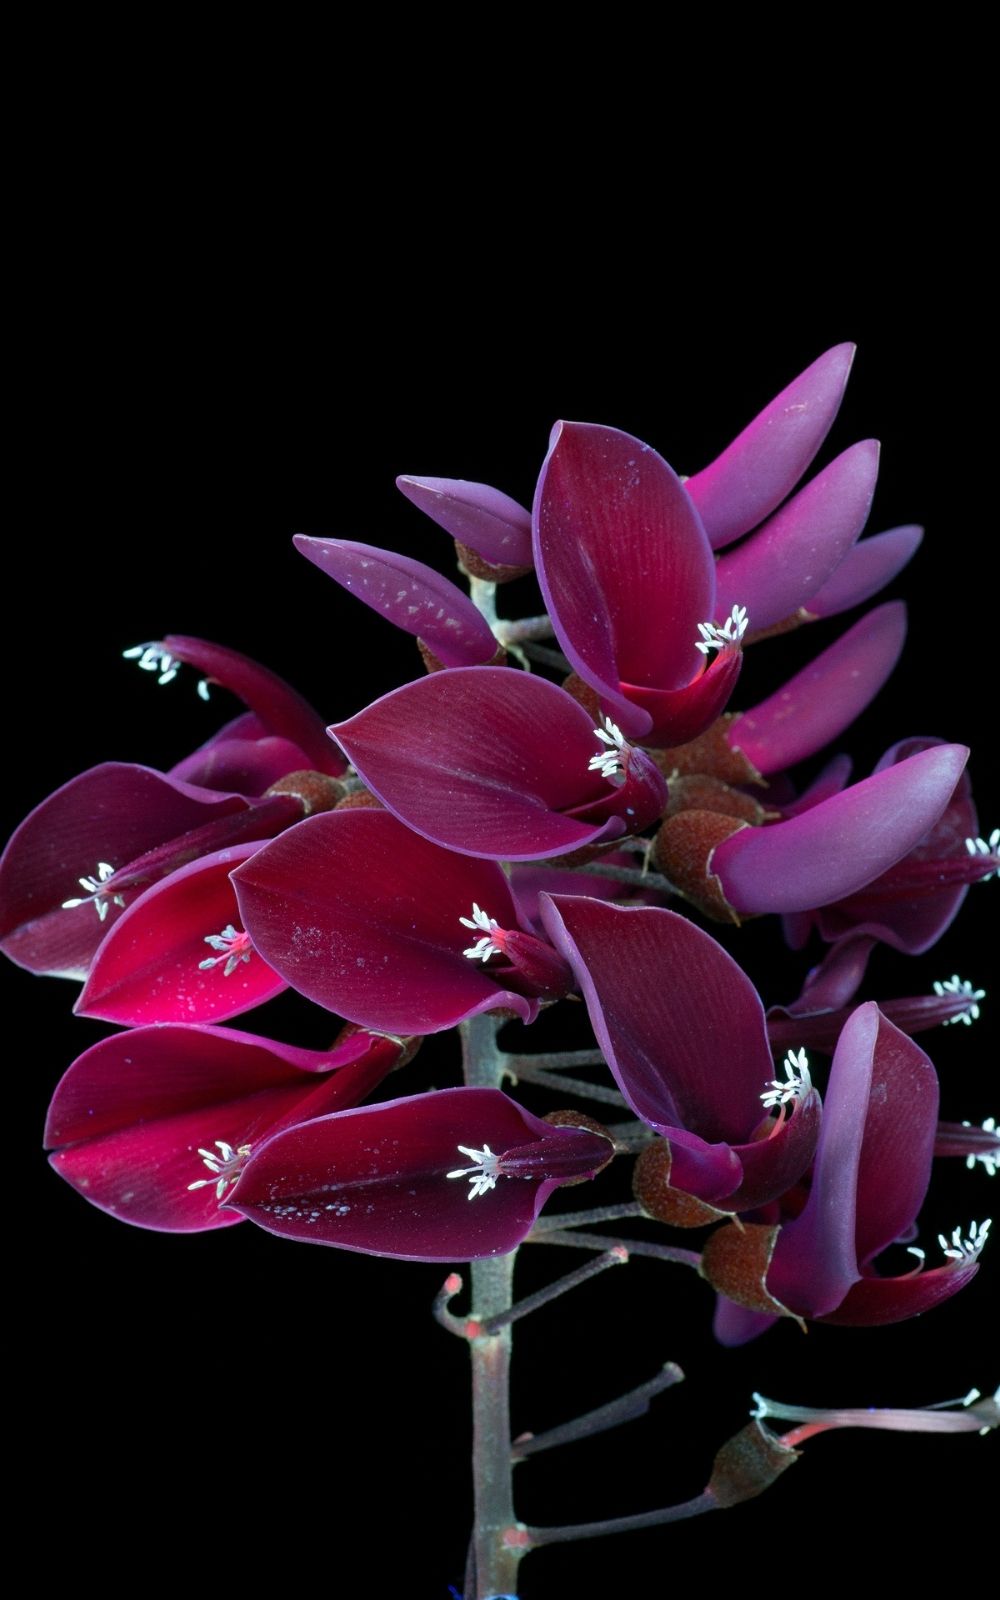 Craig Burrows - Ultraviolet Induced Fluorescence - Erythrina - coral tree